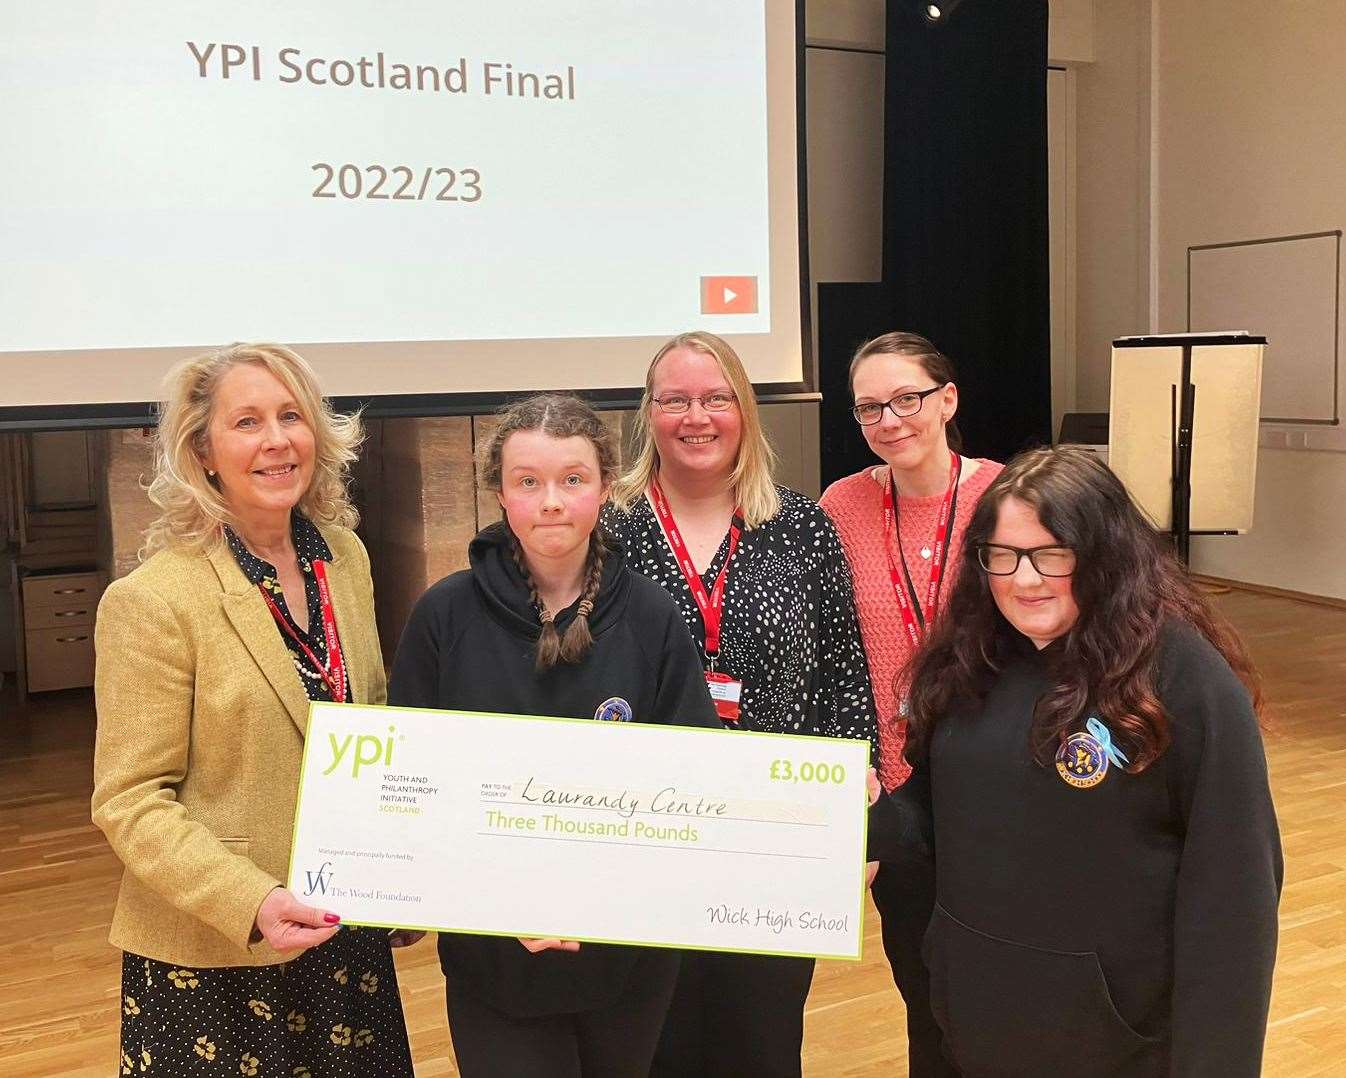 The Laurandy Centre's plans to create a wellbeing garden were boosted earlier this year by a £3000 funding award secured by Wick High School pupils. The money came through the Youth and Philanthropy Initiative (YPI), an active citizenship programme that enables young people to make a difference in their communities while developing a range of skills. Emily Webster (second from left) and Phoebe Snook (right) presented their cheque to Tracy Mackay (centre) and Jill Duncan from the Laurandy Centre, along with Ellie Lamont (left), one of the YPI judges.